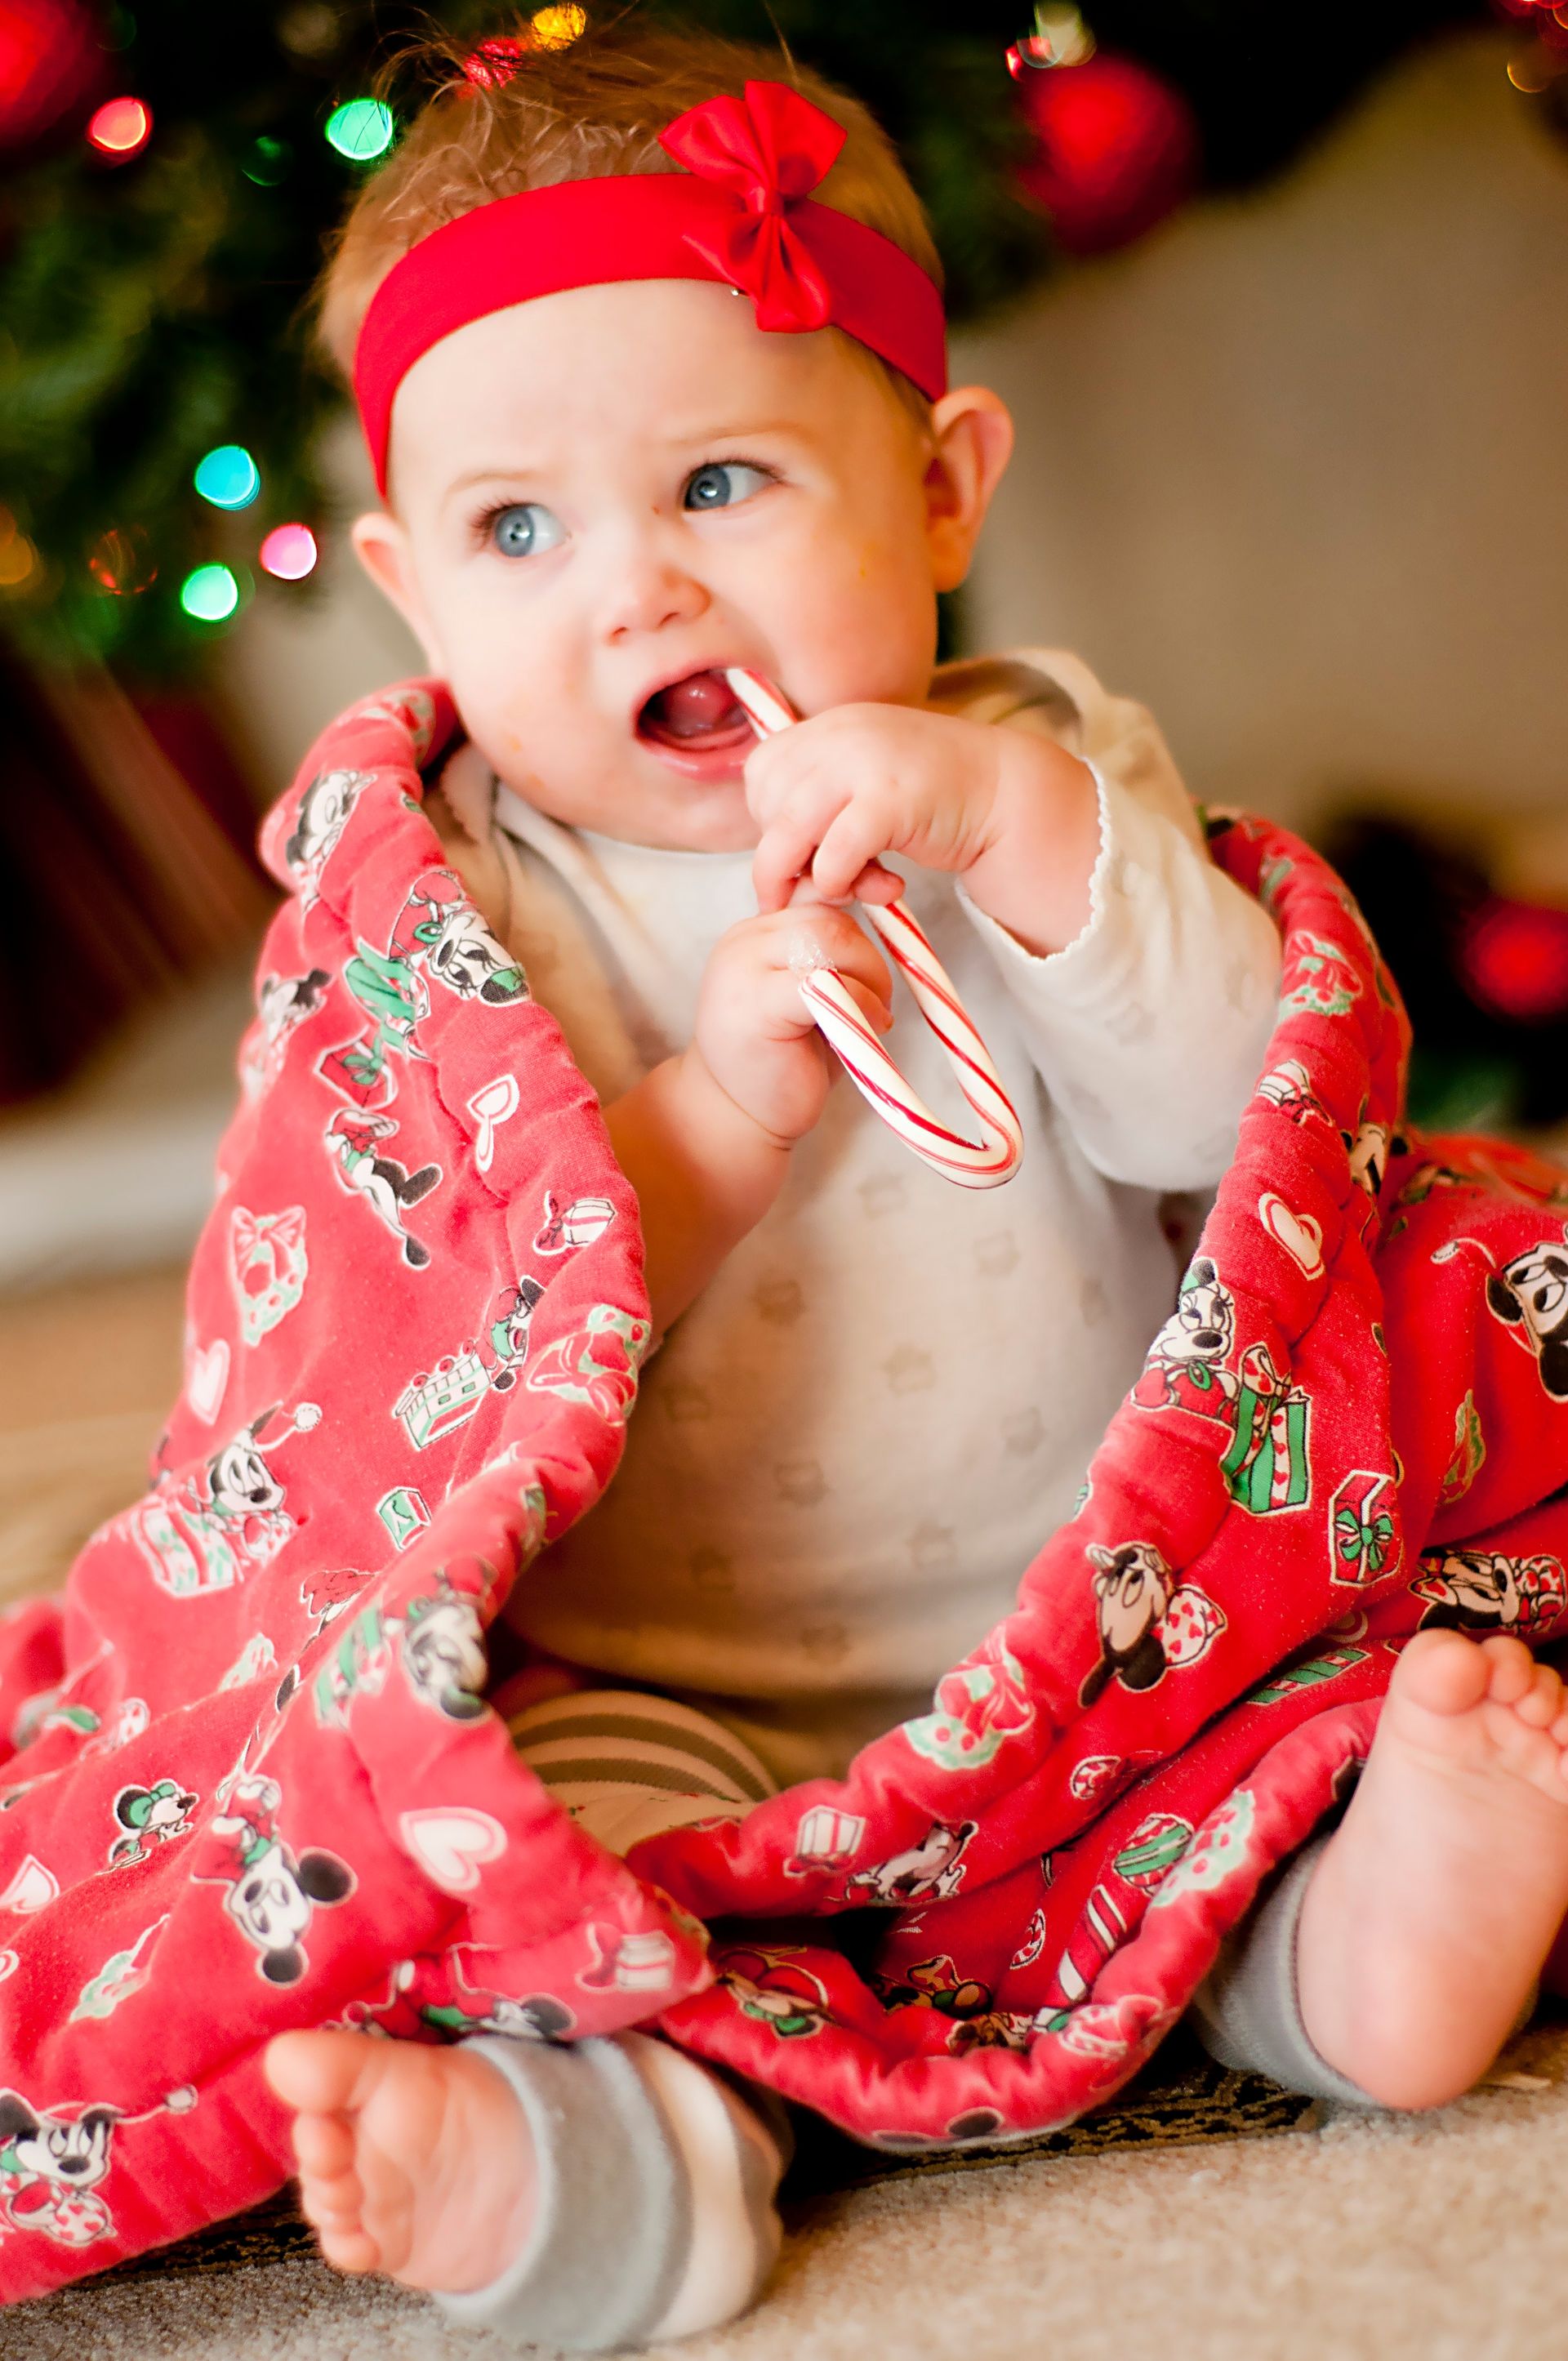 A baby girl eating a candy cane at Christmas.